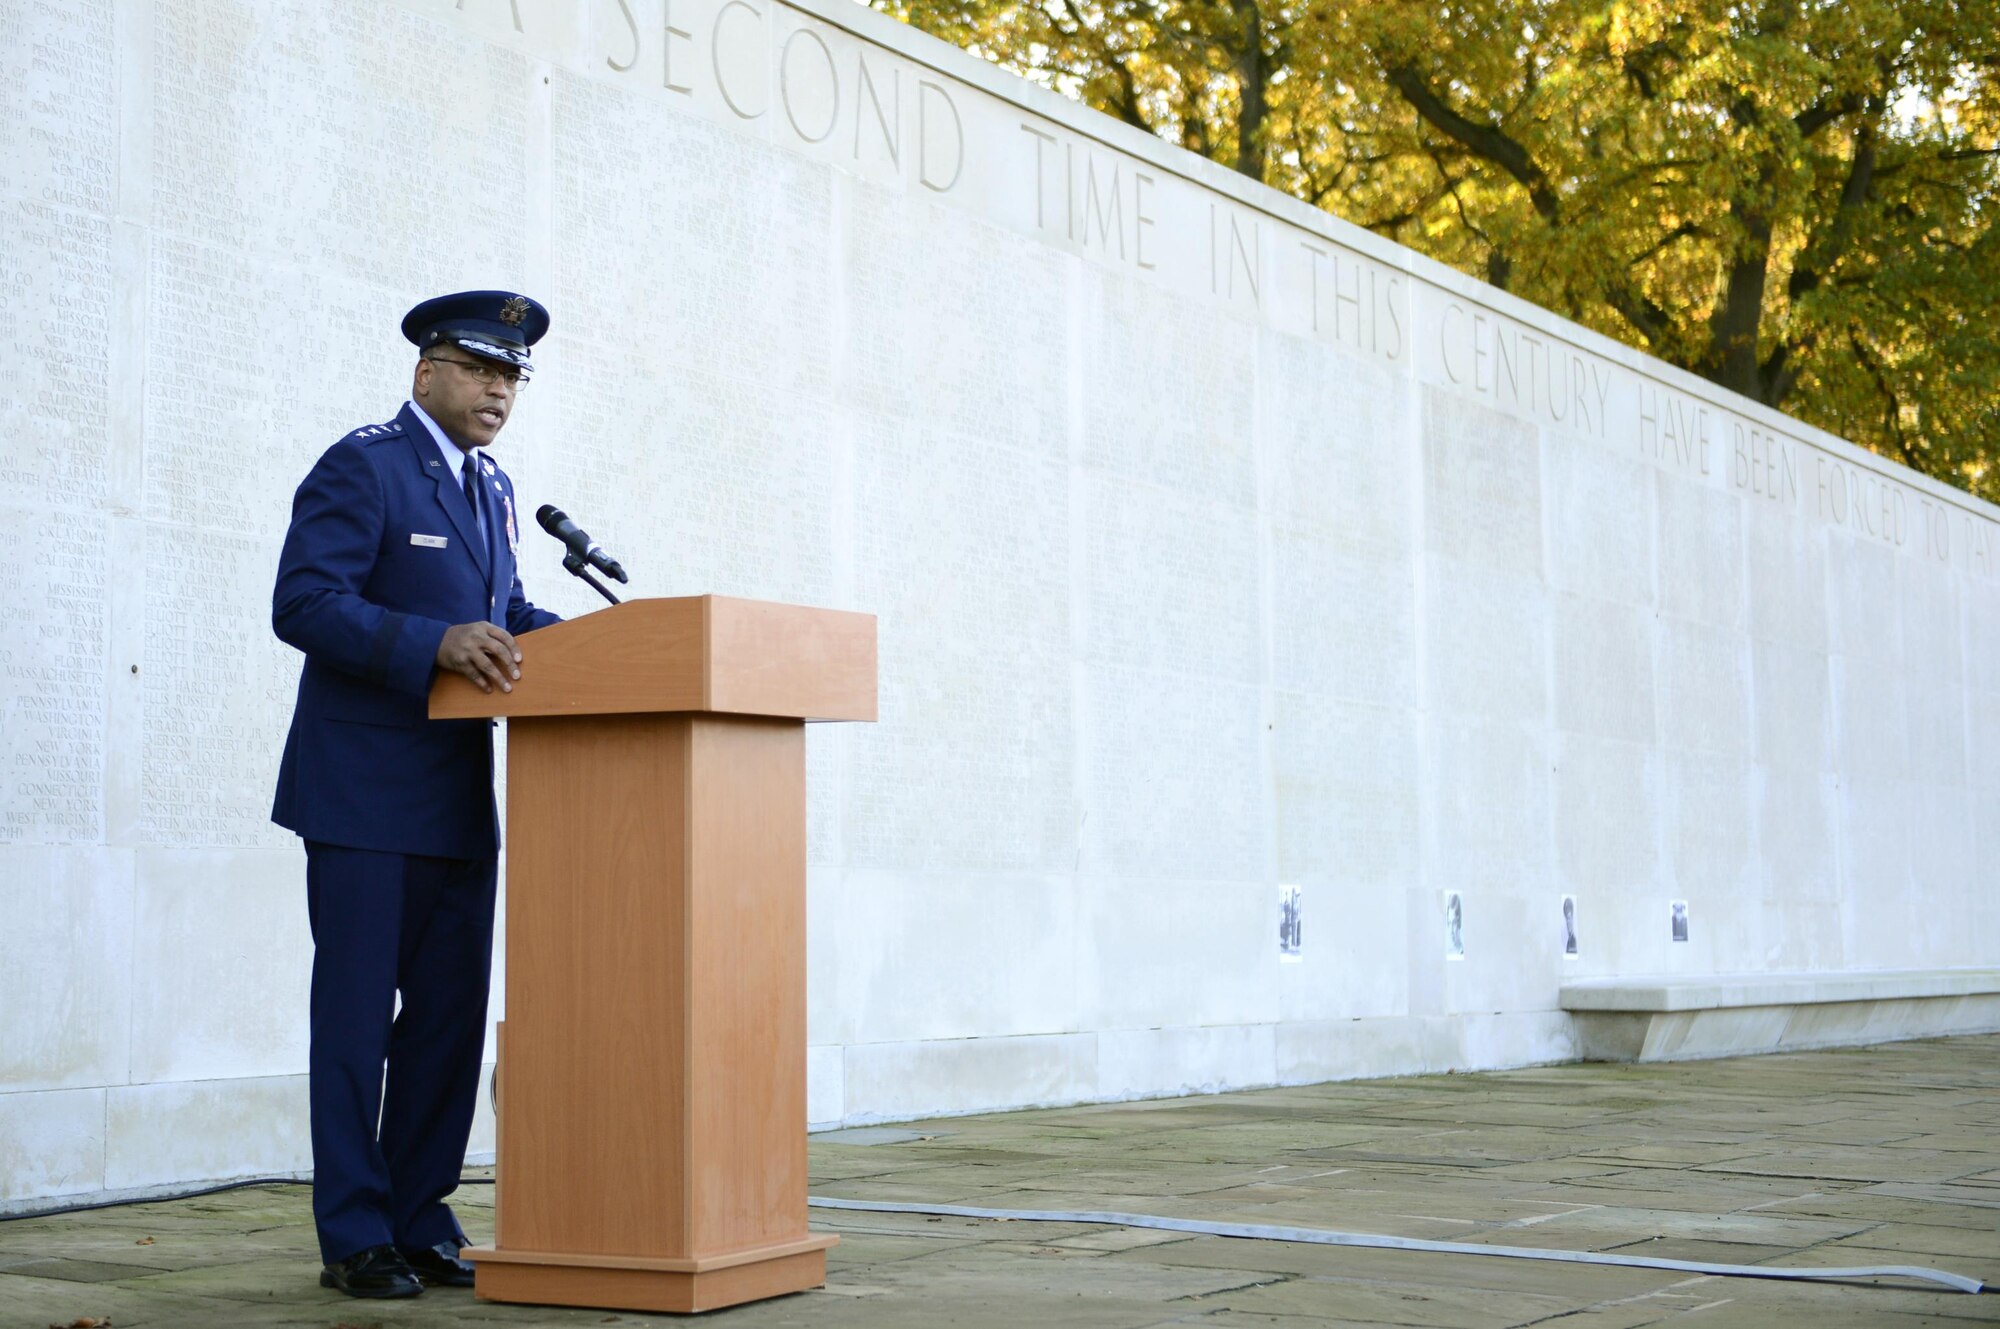 U.S. Air Force Lt. Gen. Richard Clark, 3rd Air Force commander, gives words of remembrance during a Veterans Day ceremony at the Cambridge American Cemetery in Cambridge, England, Nov. 11. Clark placed a wreath at the Tablets of the Missing in honor of the men and women who have sacrificed their lives in serviceto the United States. (U.S. Air Force photo/Senior Airman Malcolm Mayfield) 